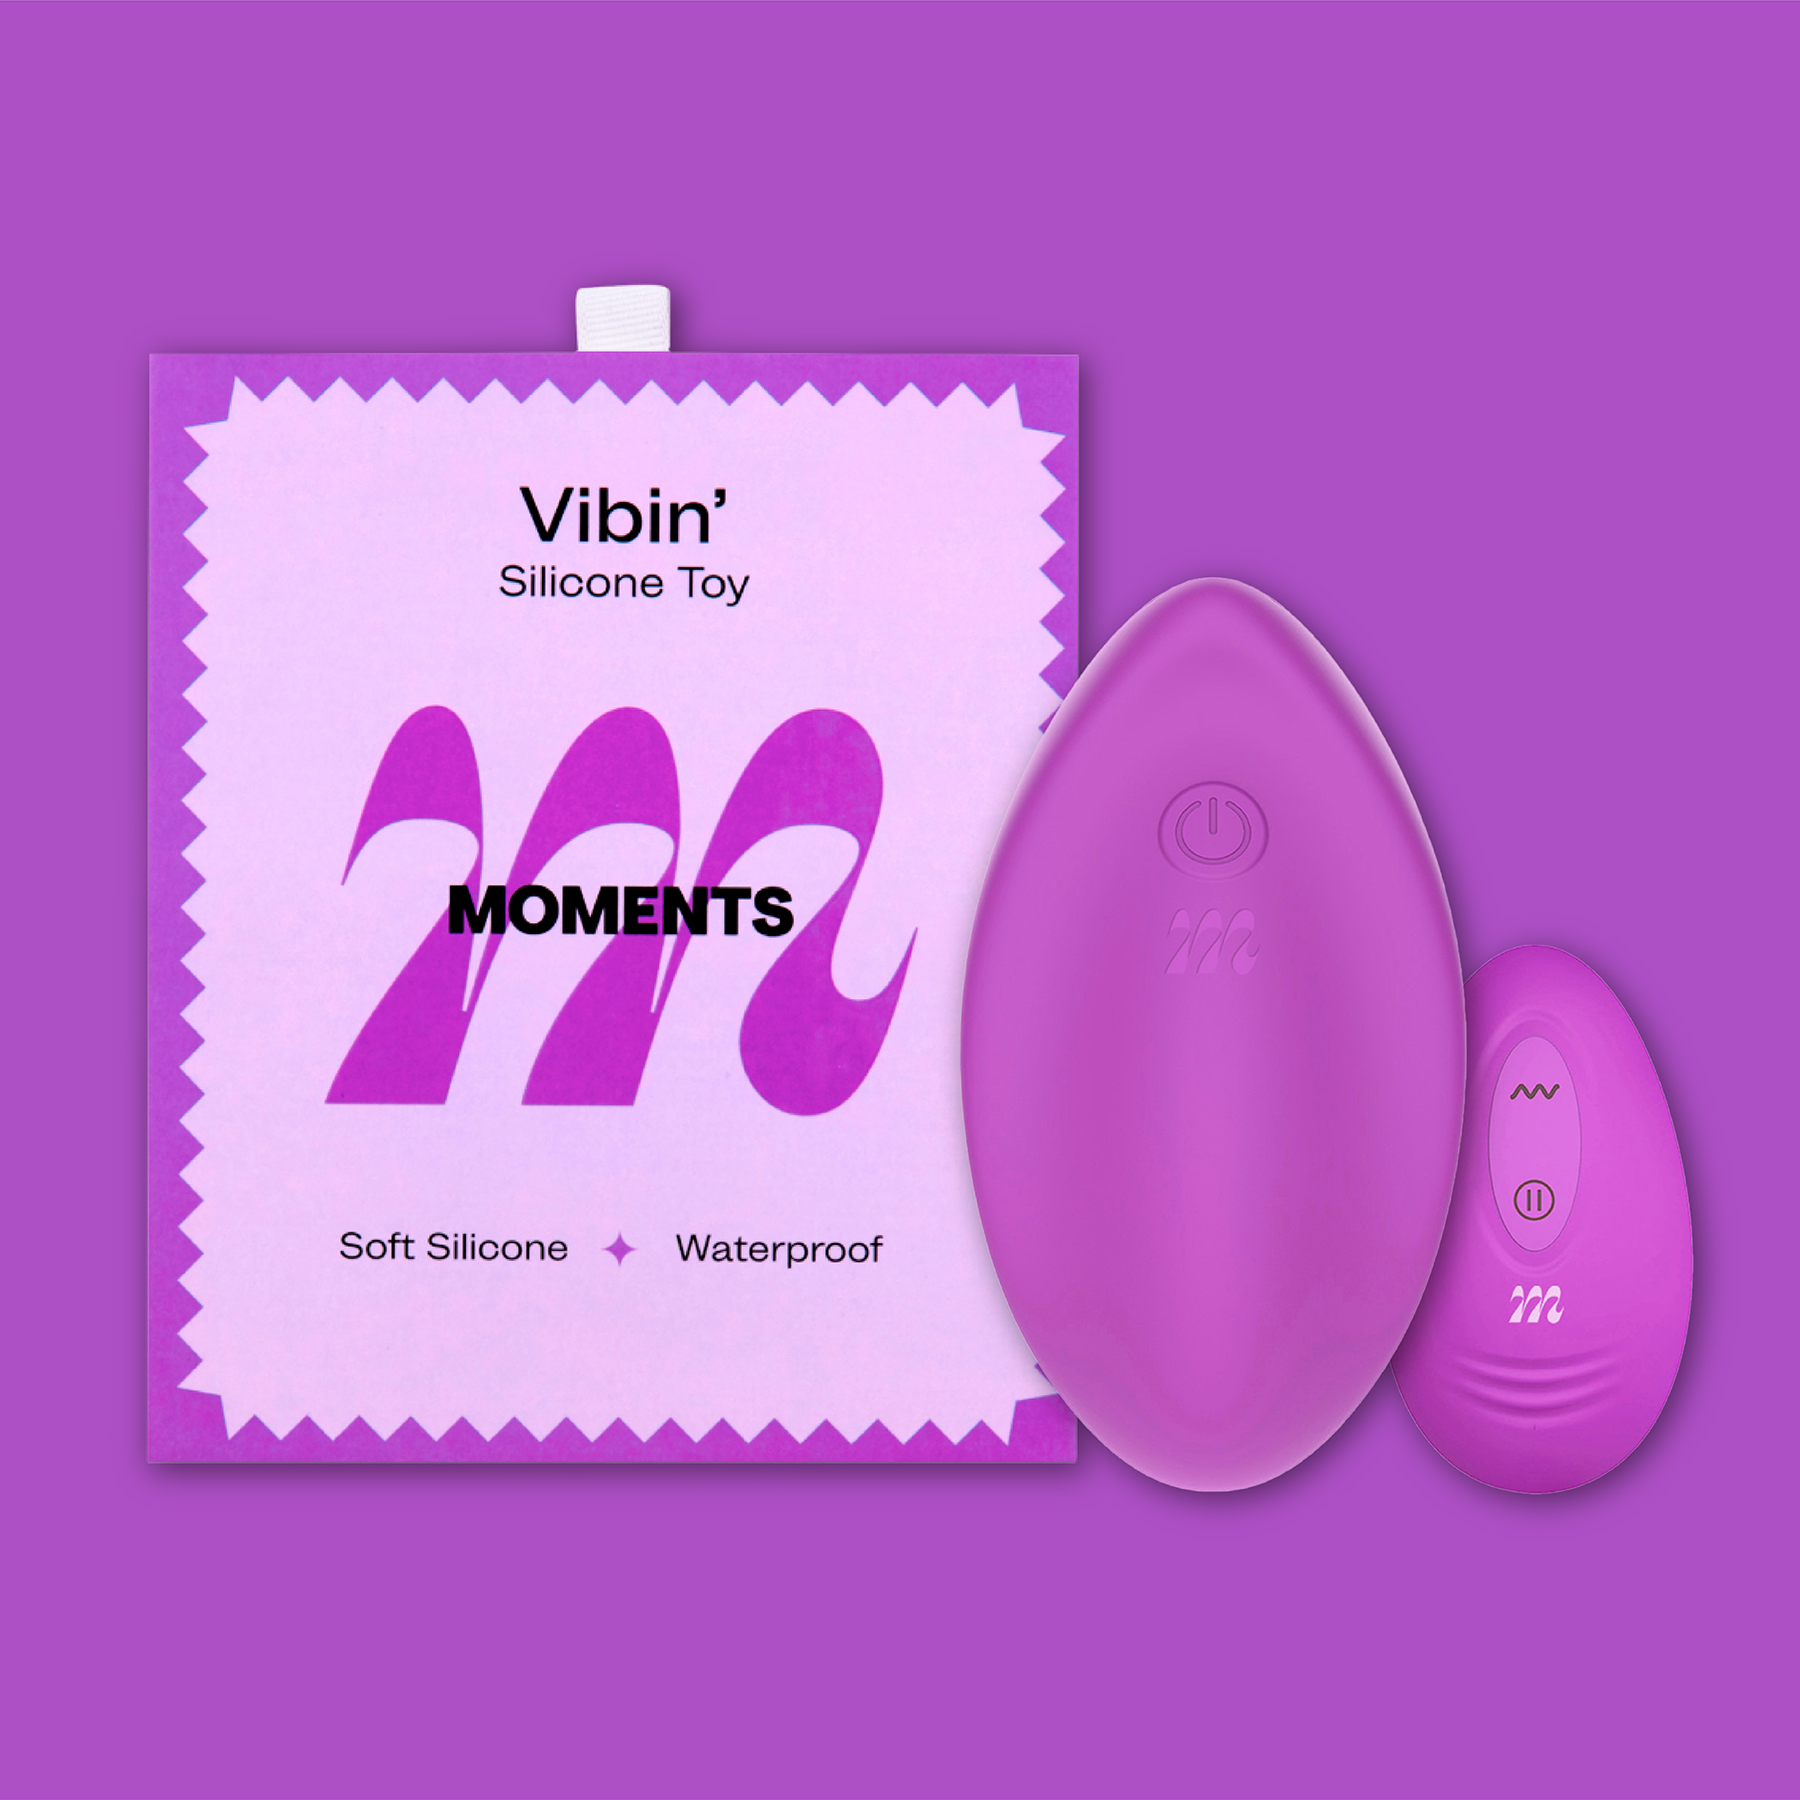 Silicone Vibin' toy with 'moments' inscription